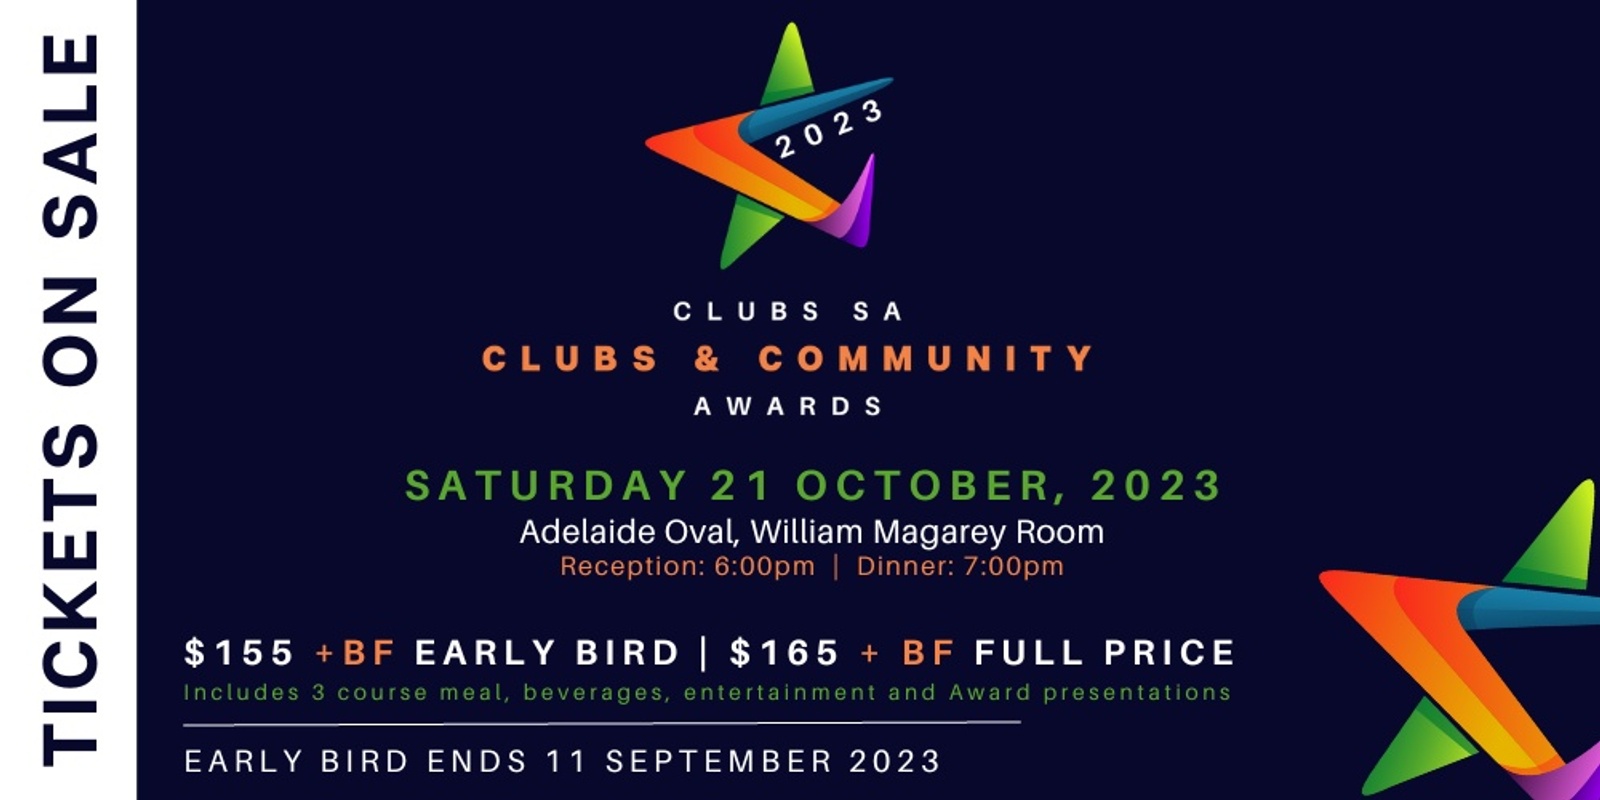 Banner image for Clubs SA 2023 Clubs & Community Awards